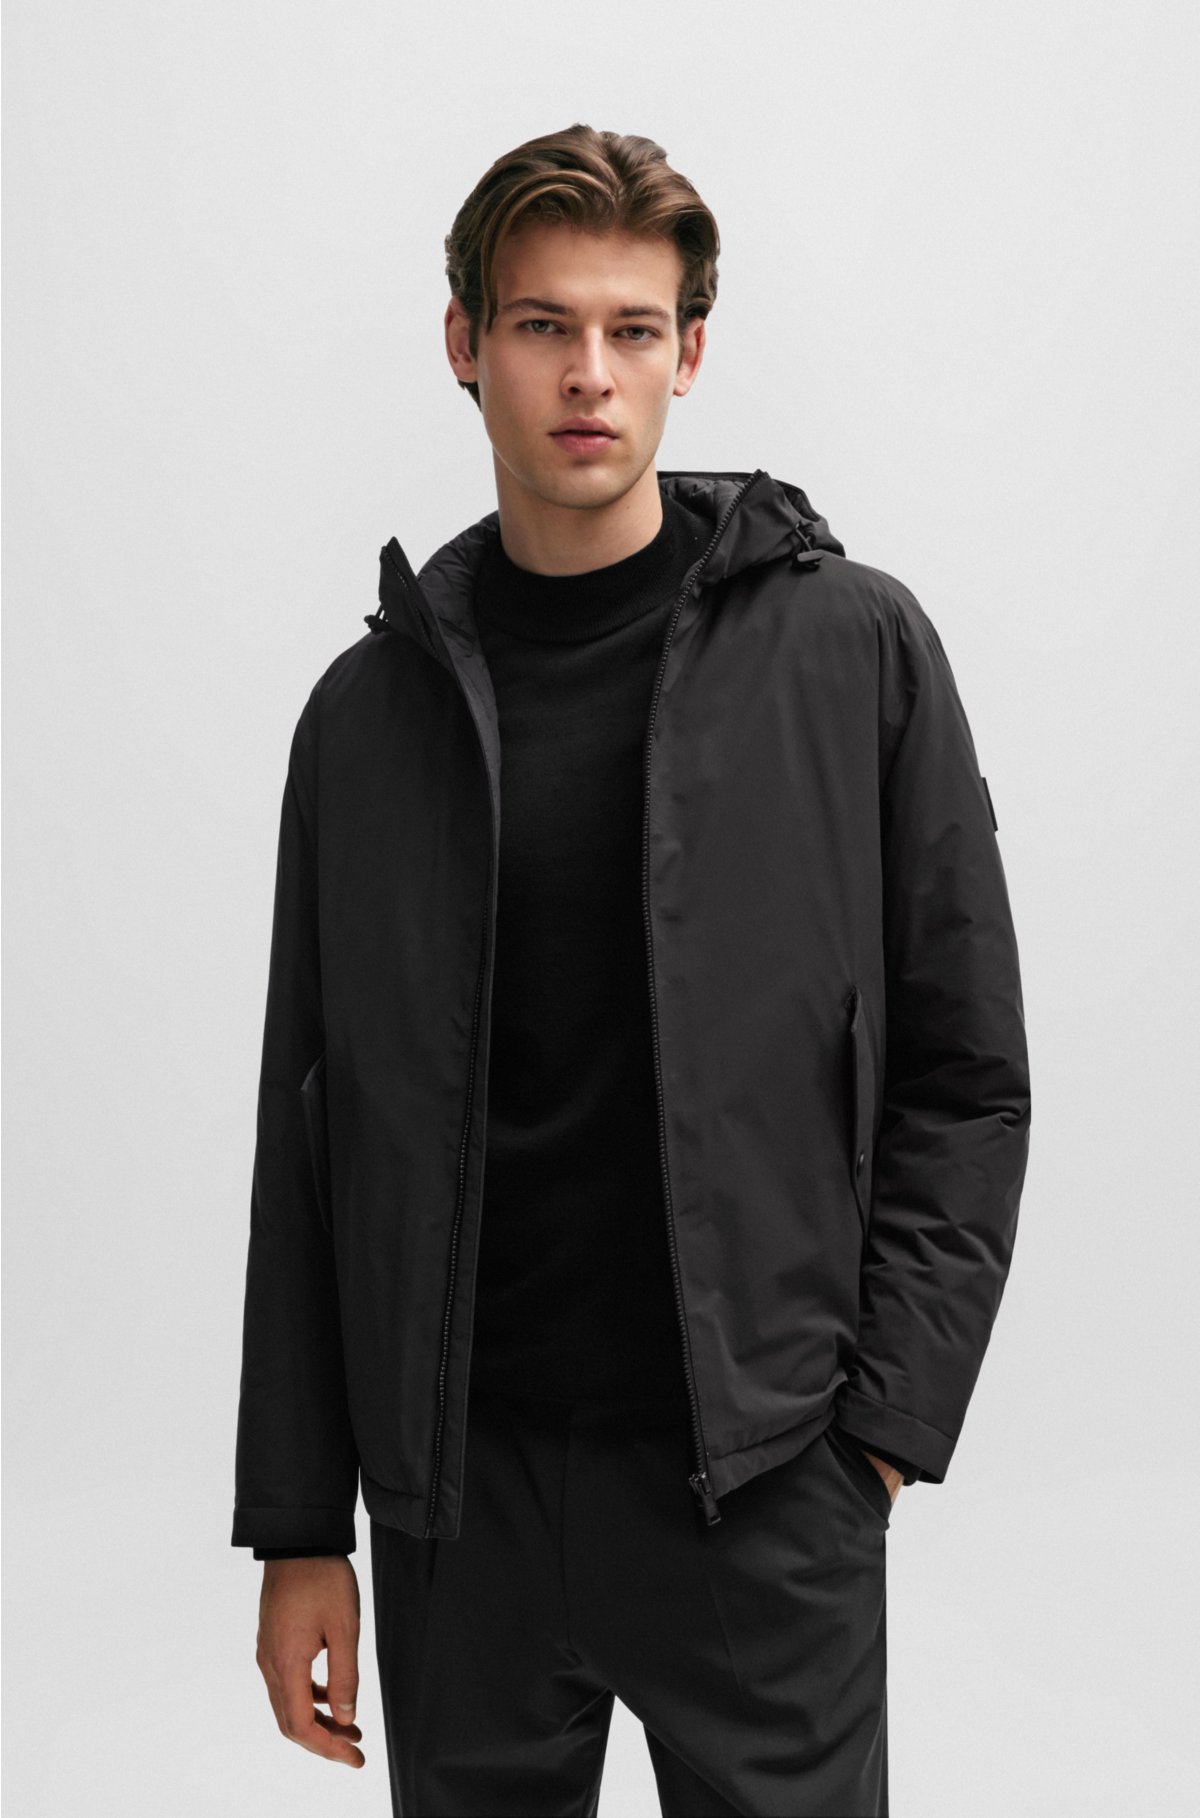 BOSS stretch jacket - material crease-resistant Water-repellent in